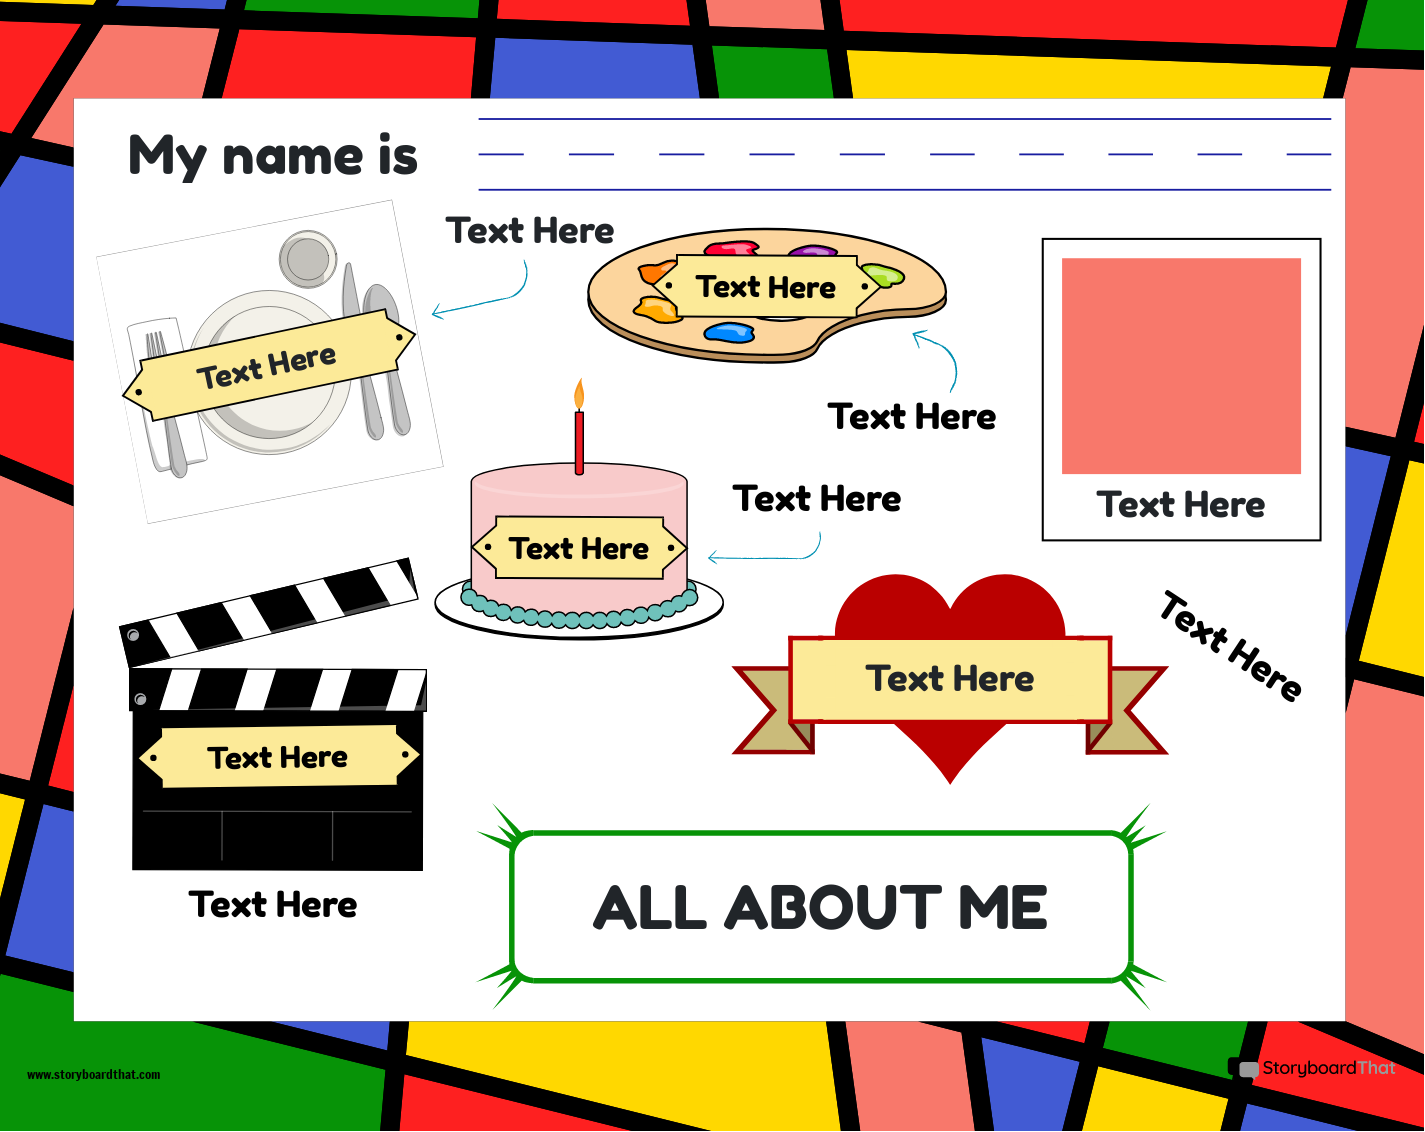 All About Me Activity for Kids